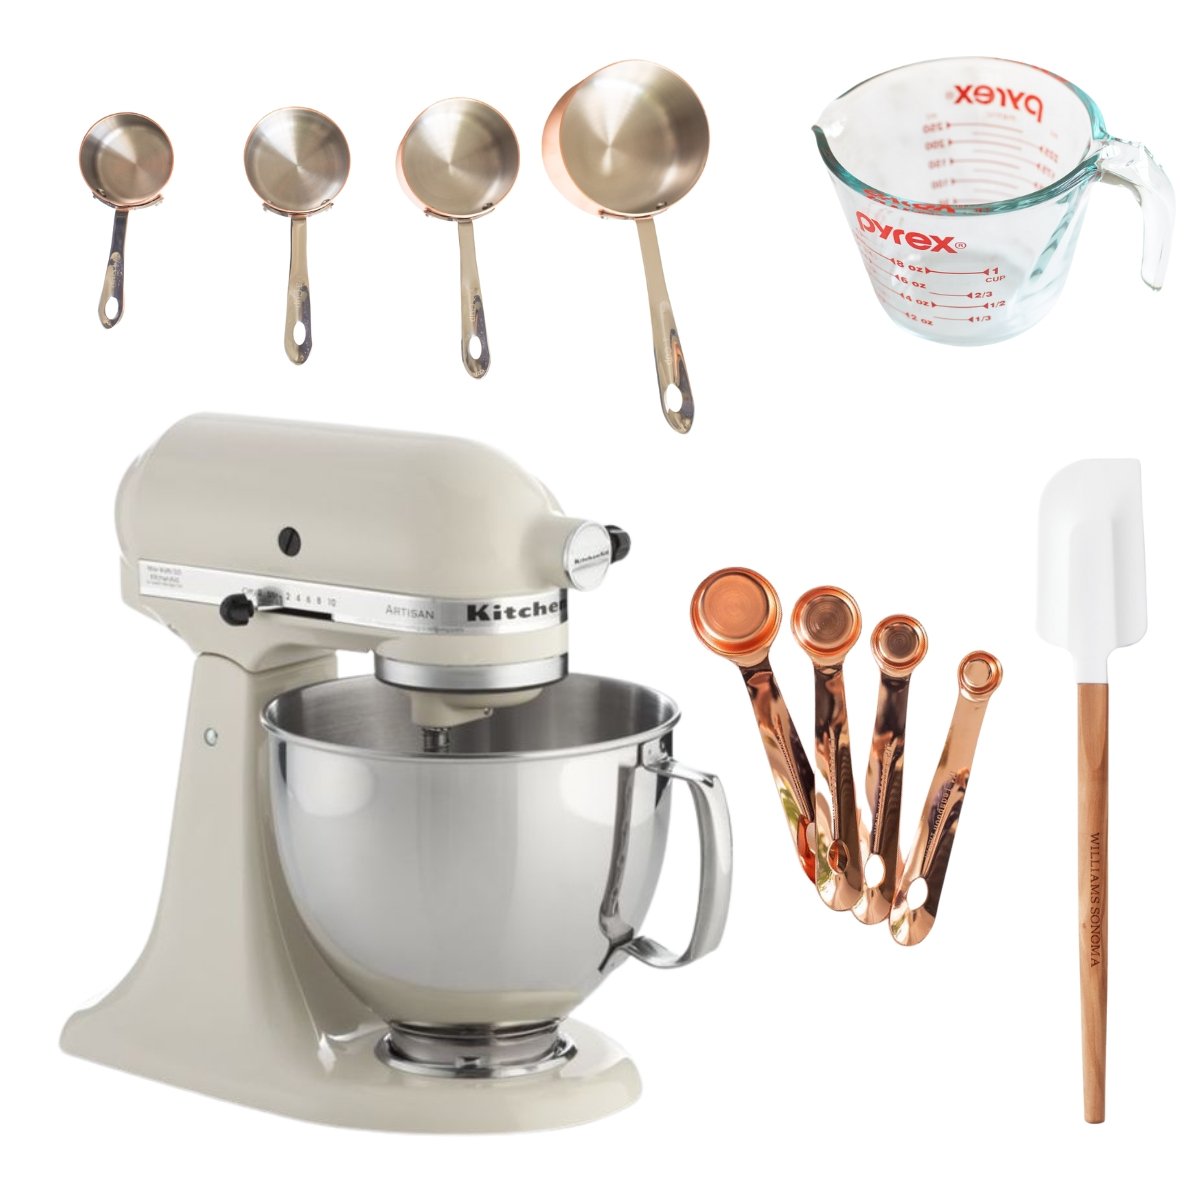 A kitchenaid mixer, measuring spoons, and other kitchen utensils used for baking a cookie butter cake recipe.